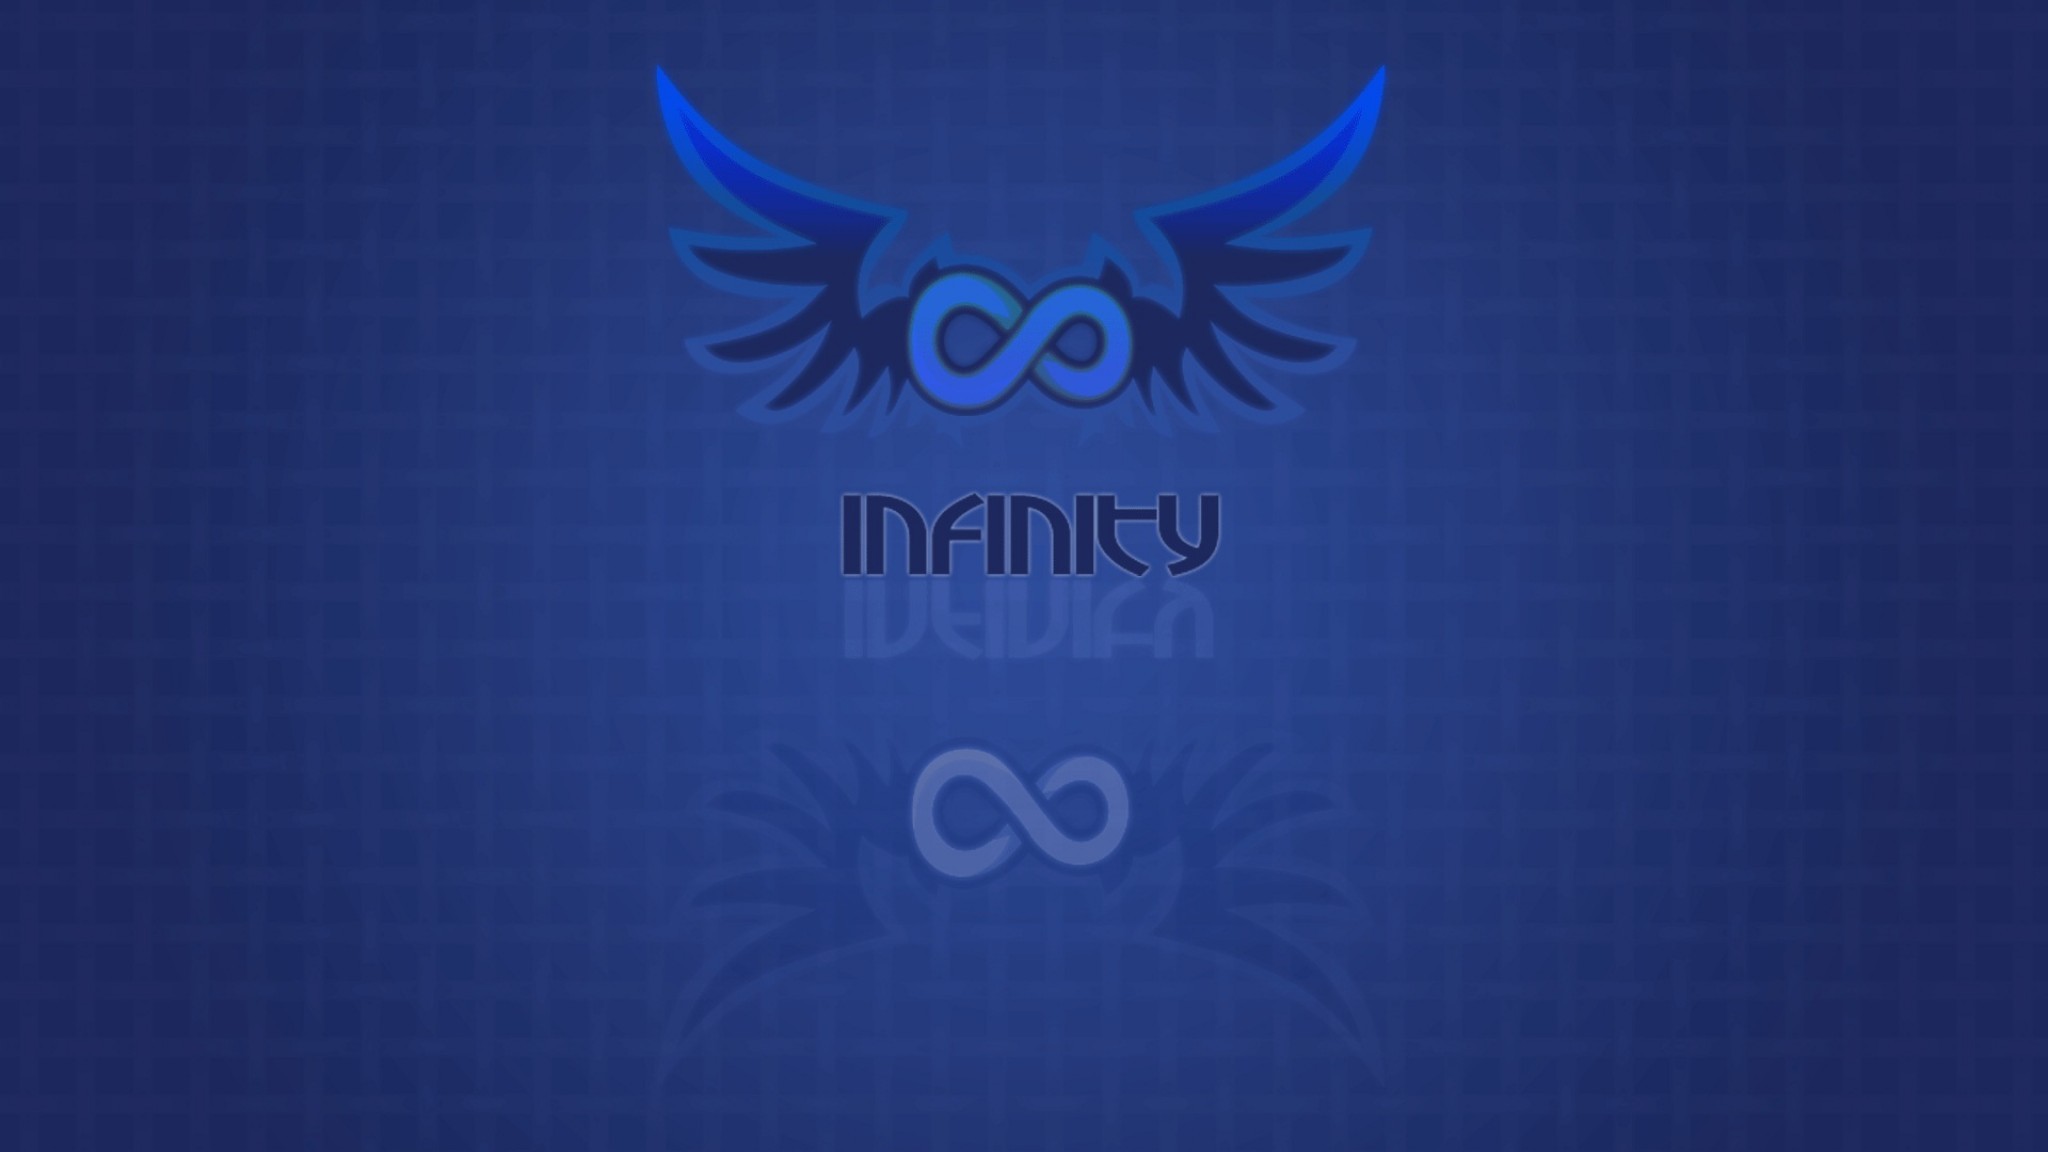 2048x1152 Infinity Sign Wallpaper Iphone - image #474